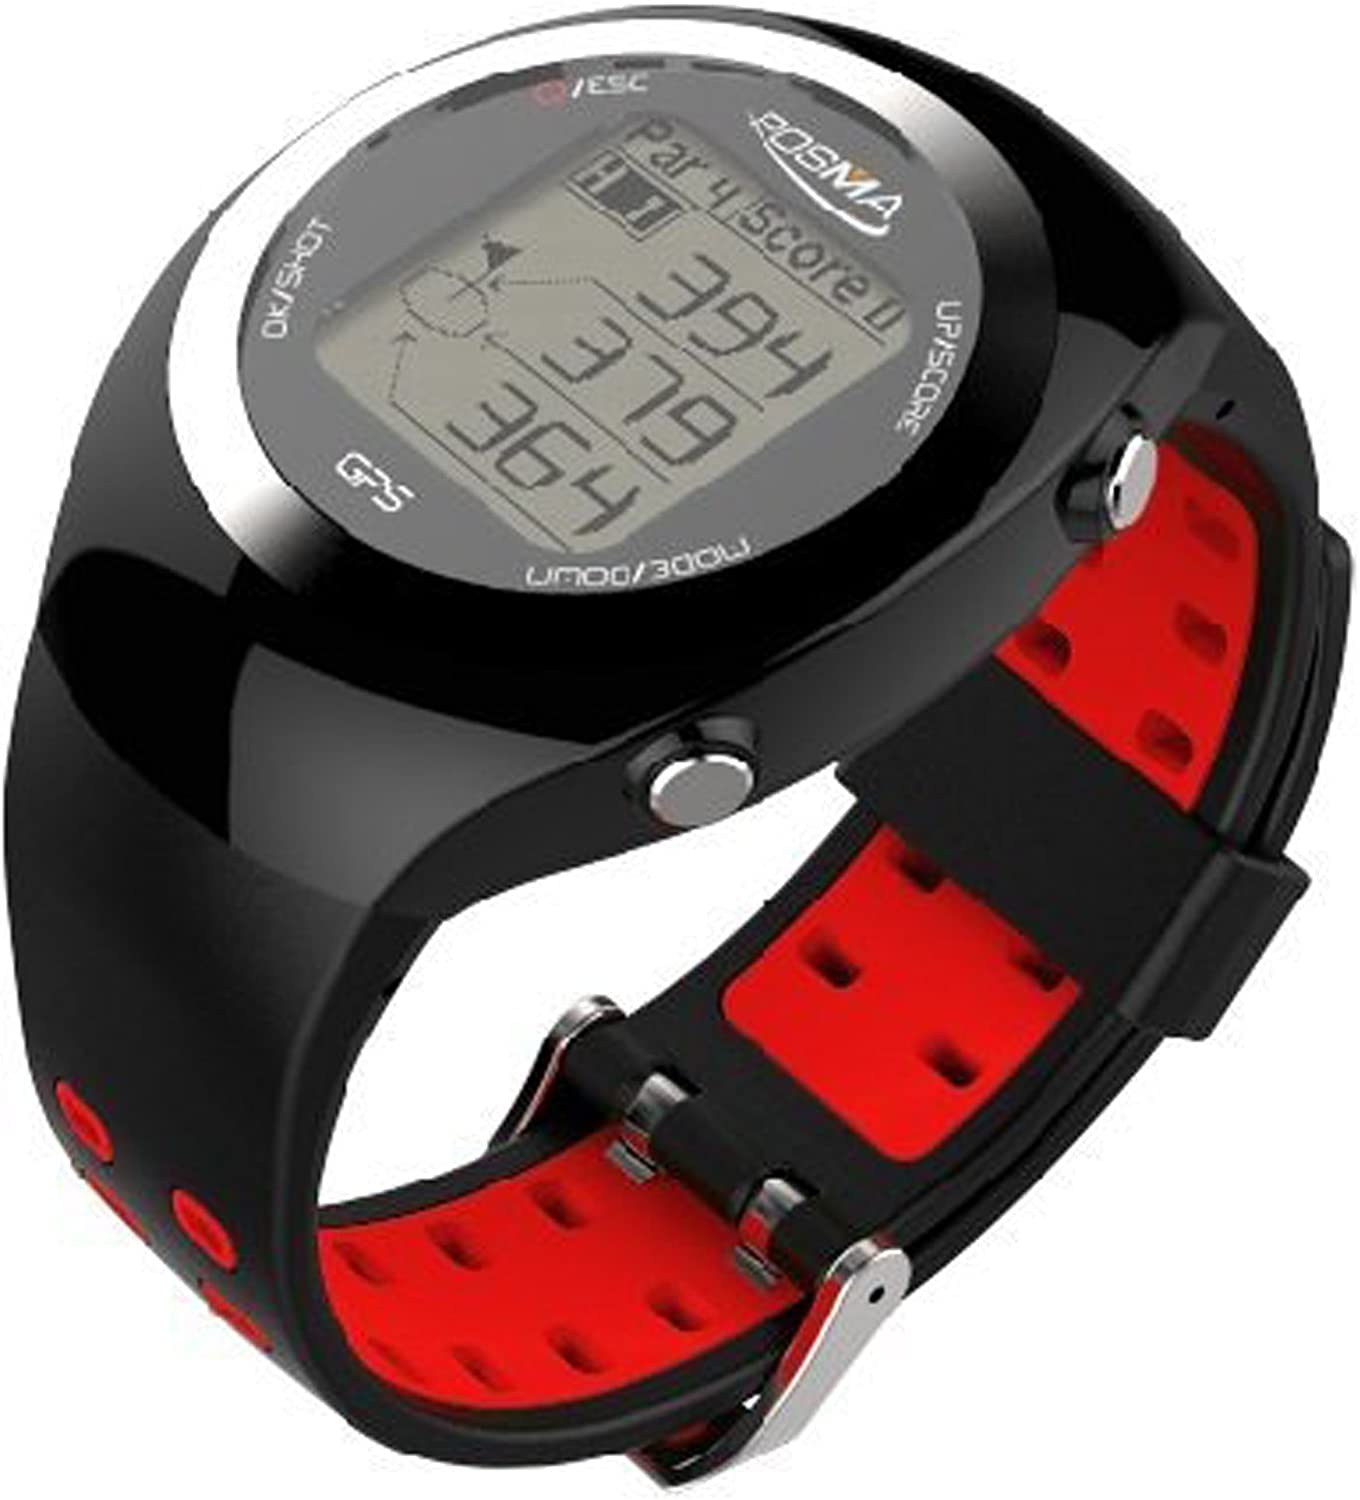 Mens IDS Home Posma GT2 Golf GPS Watches